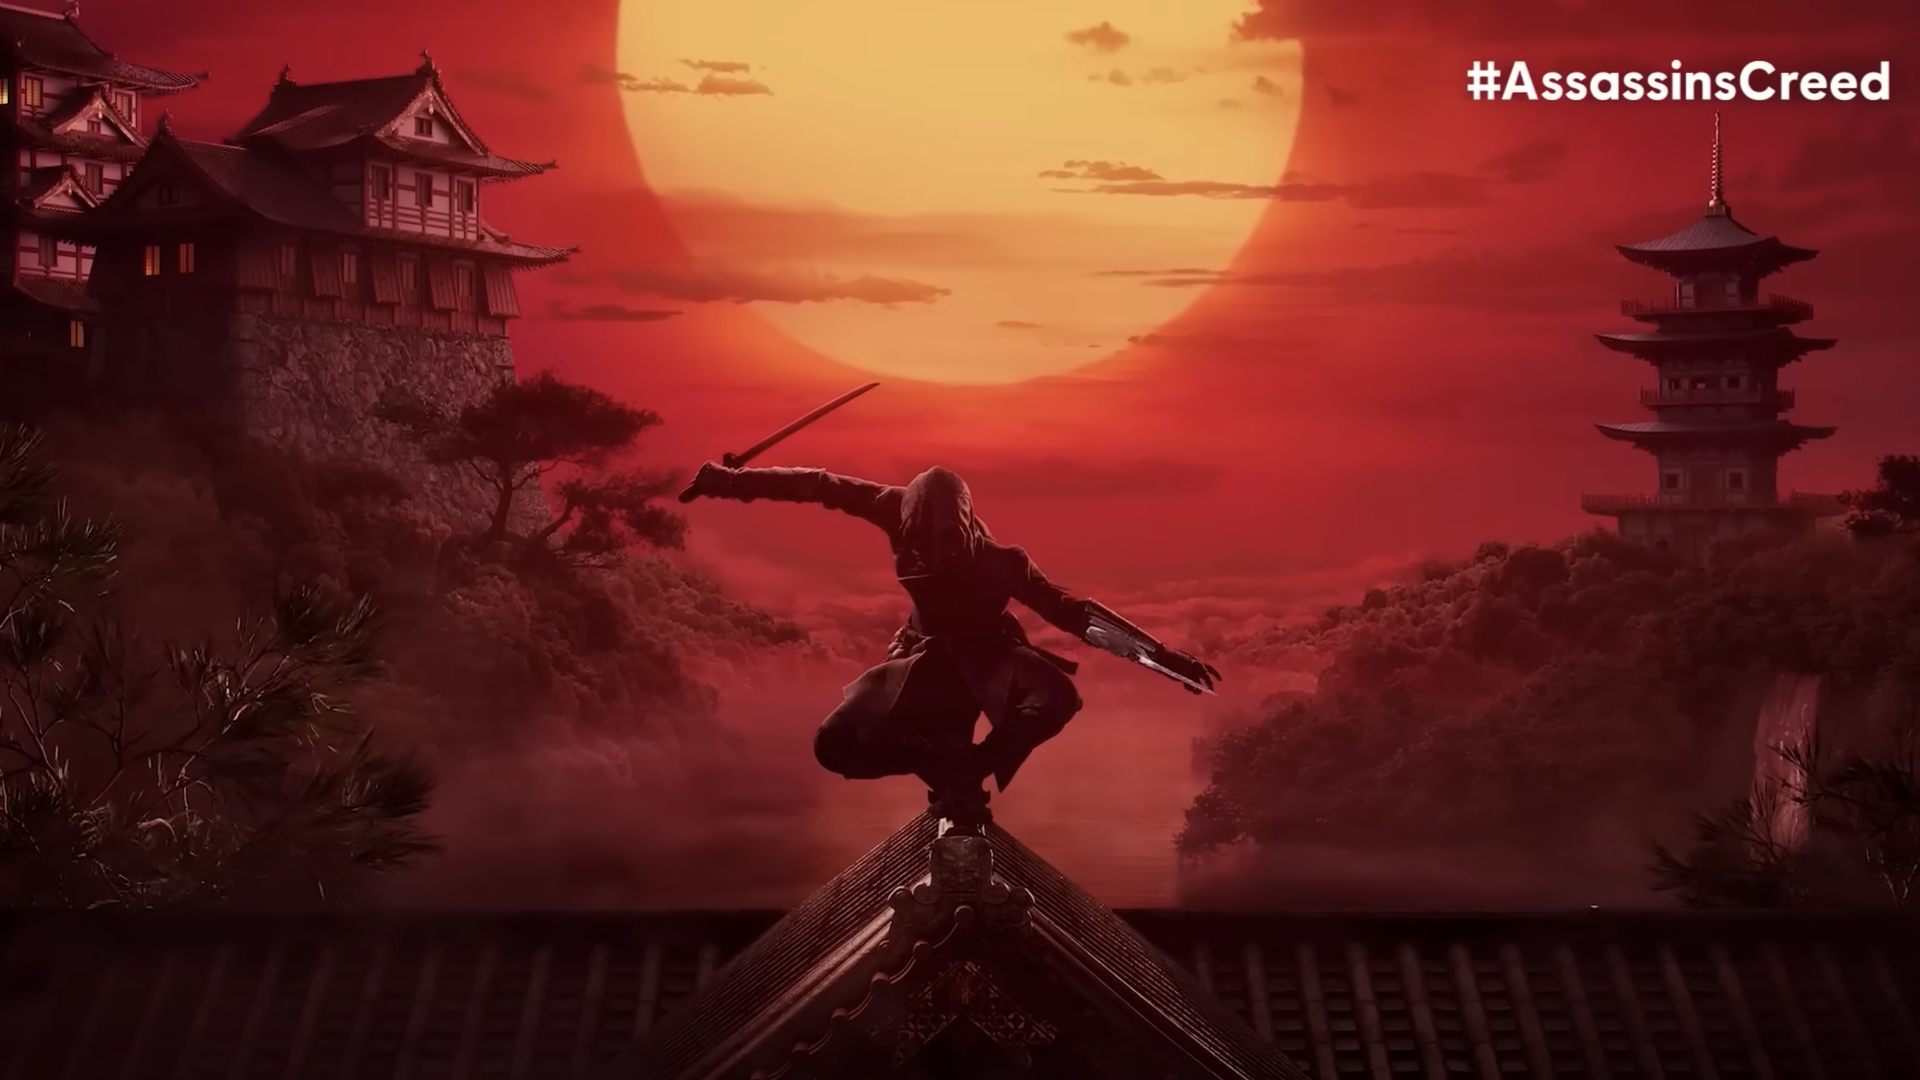 Video game image of a ninja on a rooftop, in front of a sunset